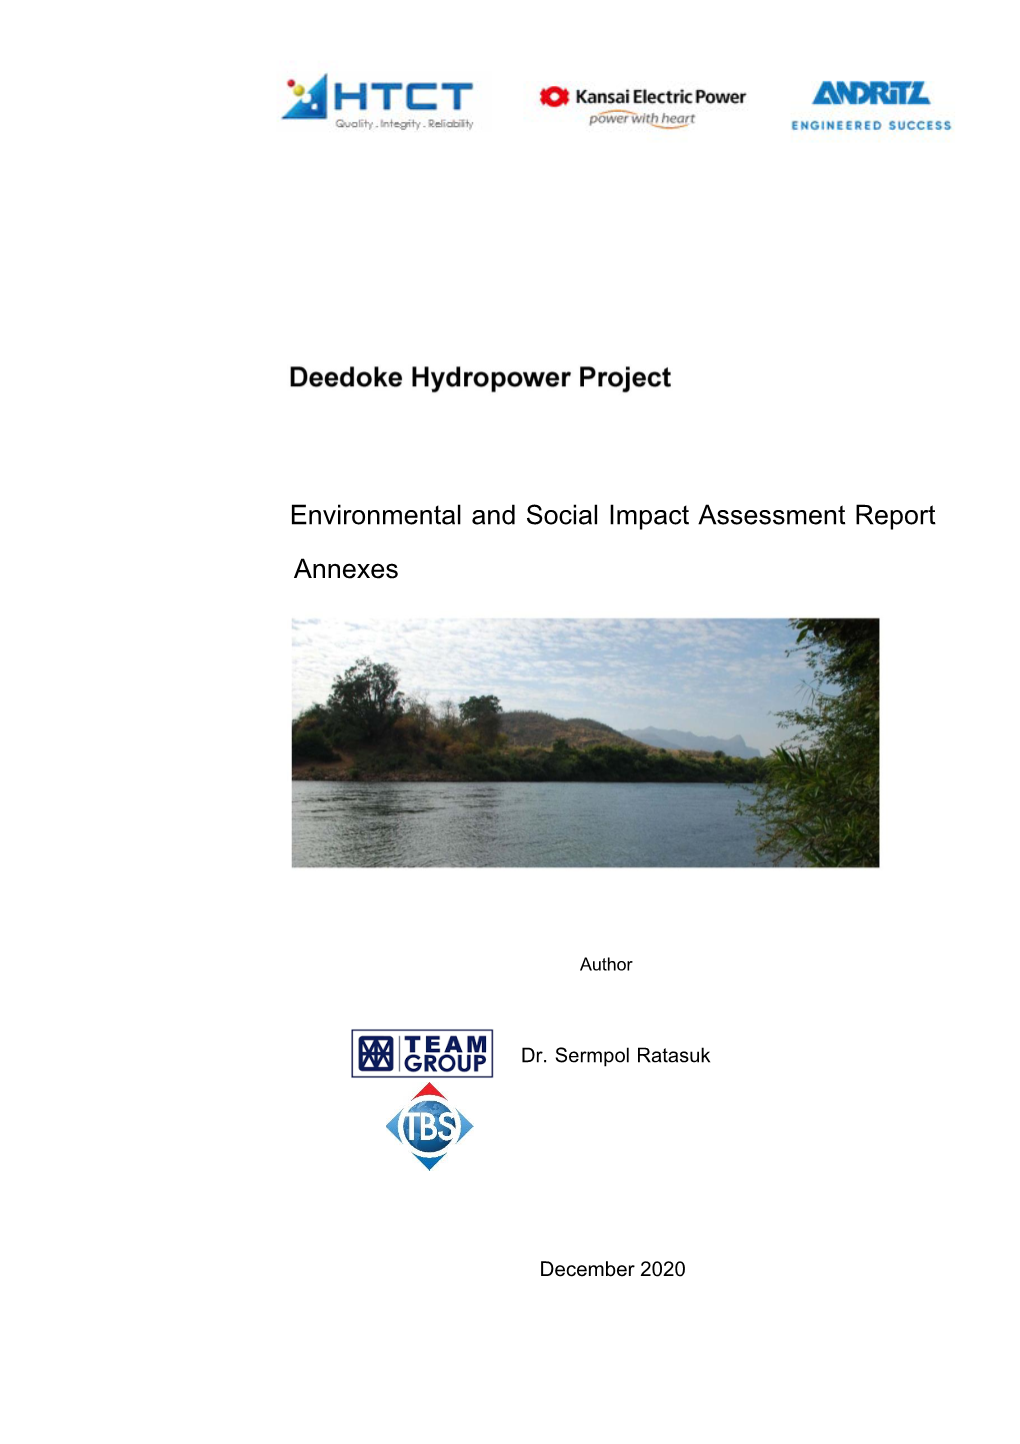 Environmental and Social Impact Assessment Report Annexes